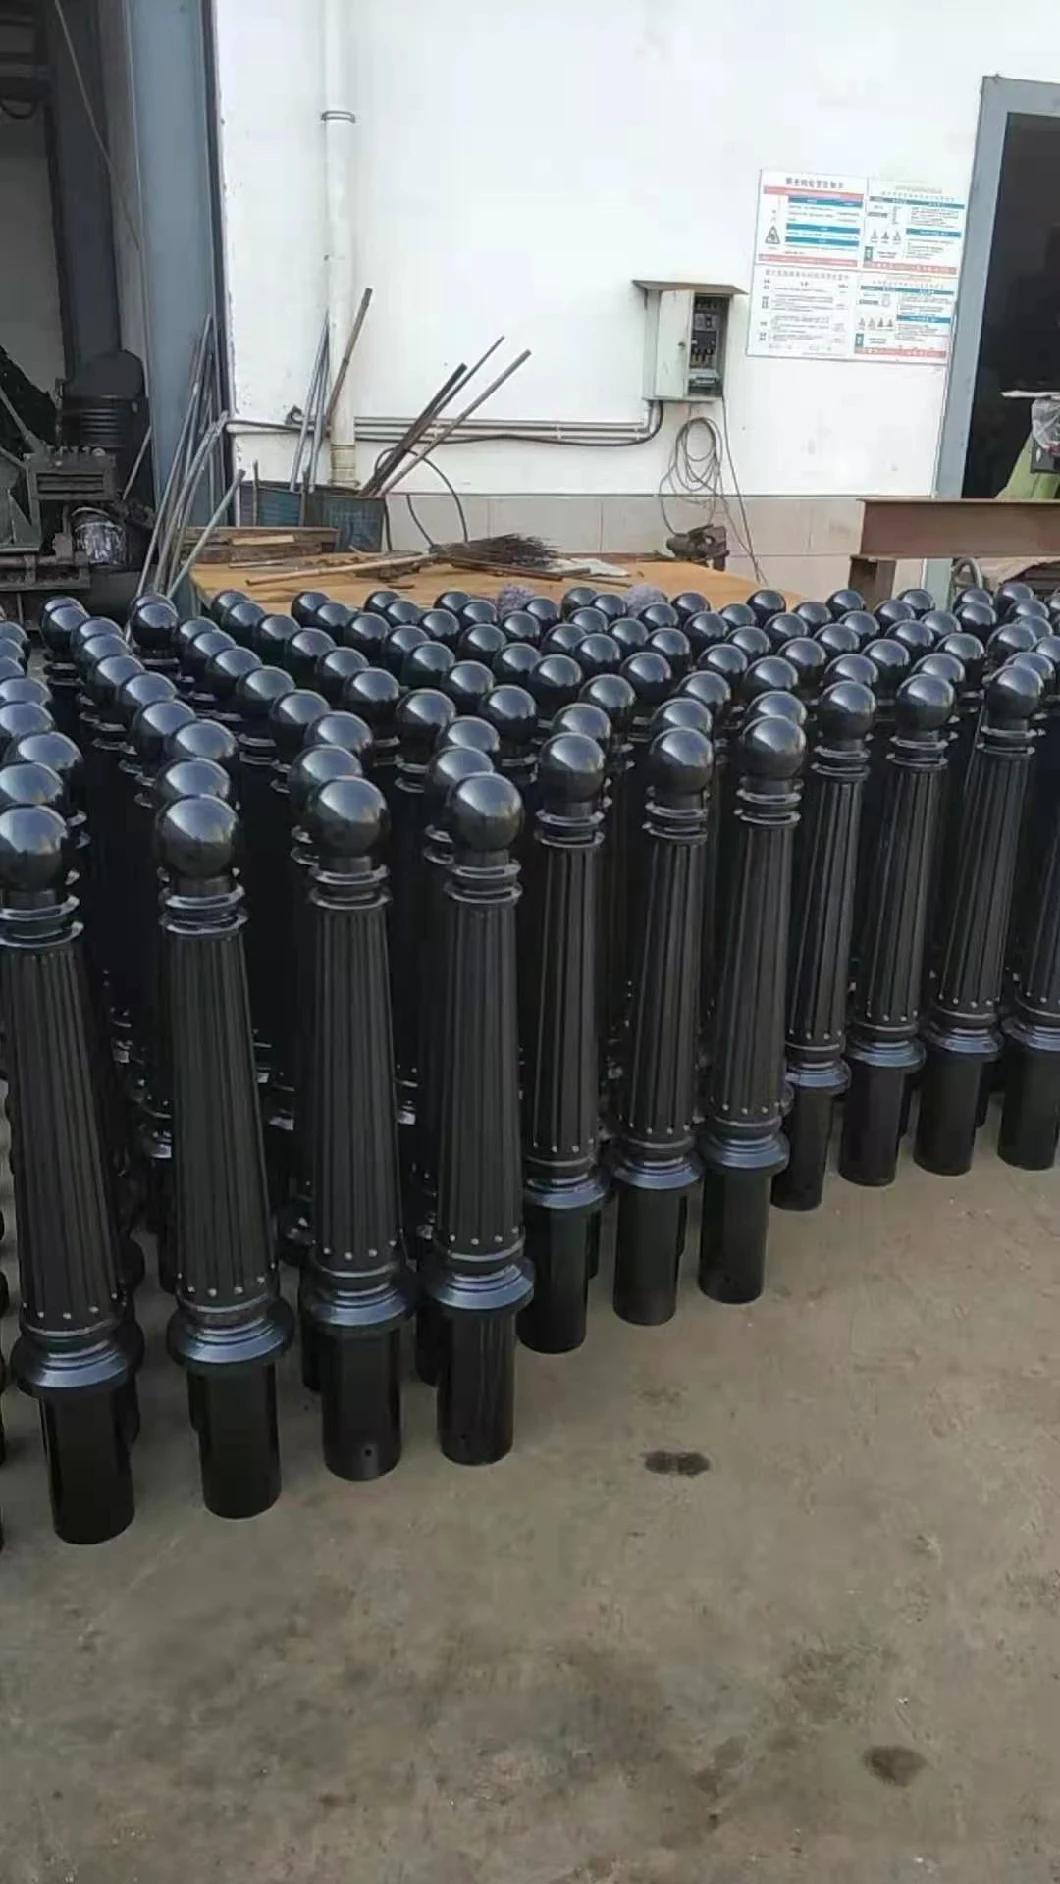 Cast Ductile Iron Cast Steel Outdoor Street Utility Parking Removable Chain Bollard Road Traffic safety Barrier Bollards